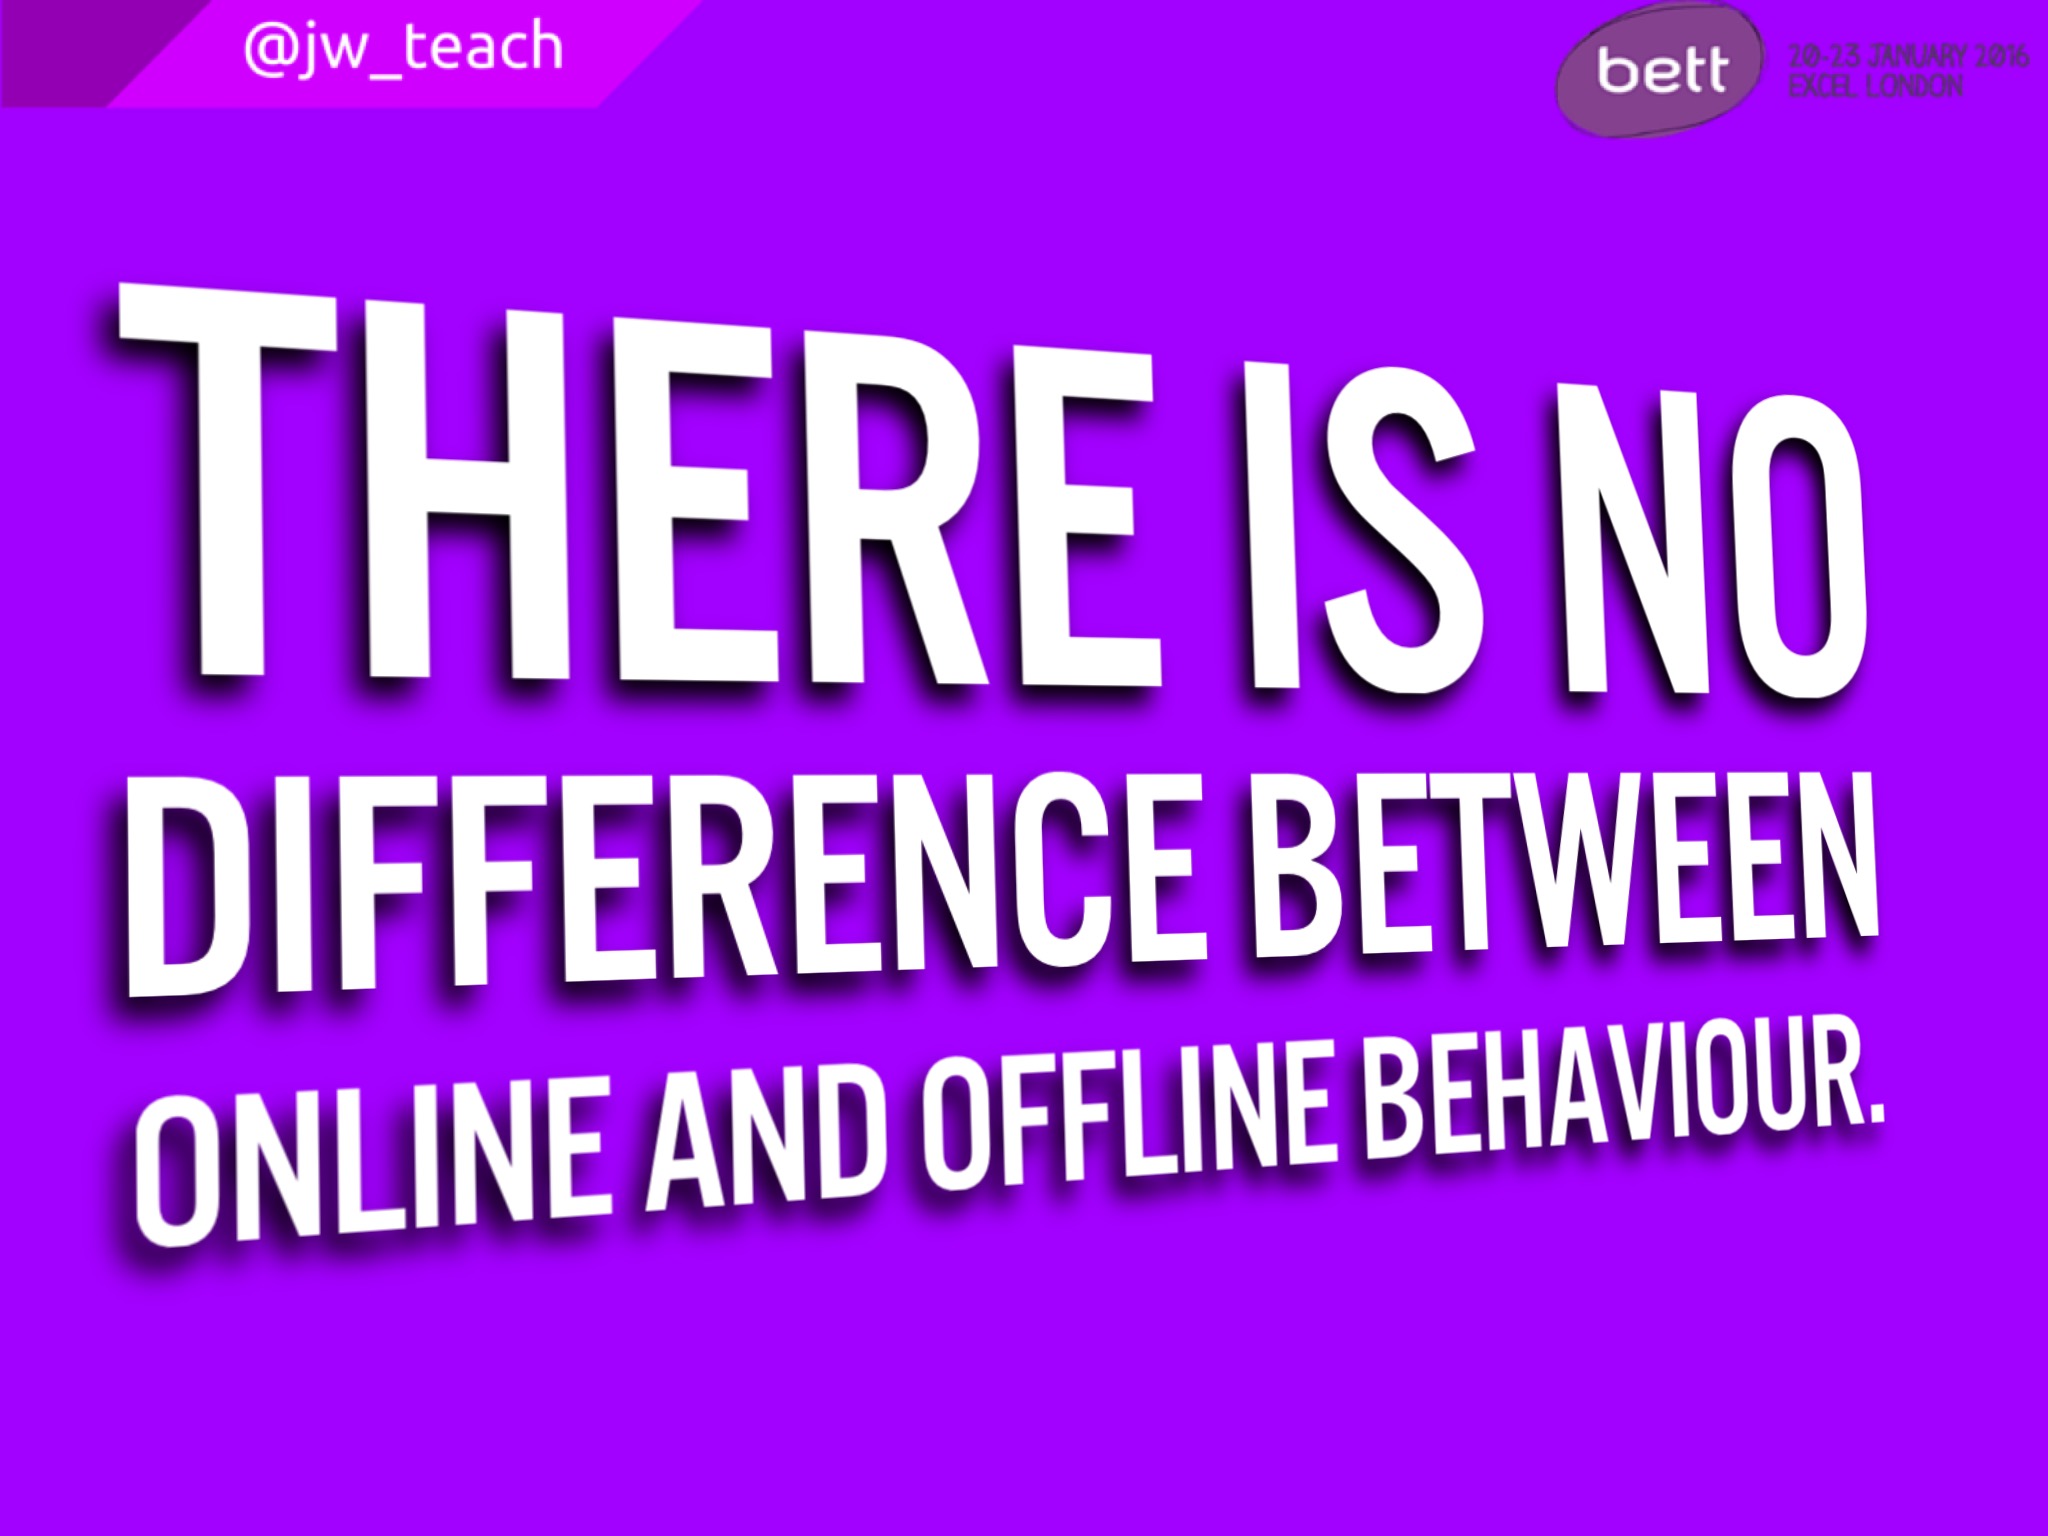 Linking Online and offline behaviour and the impact on wellbeing.